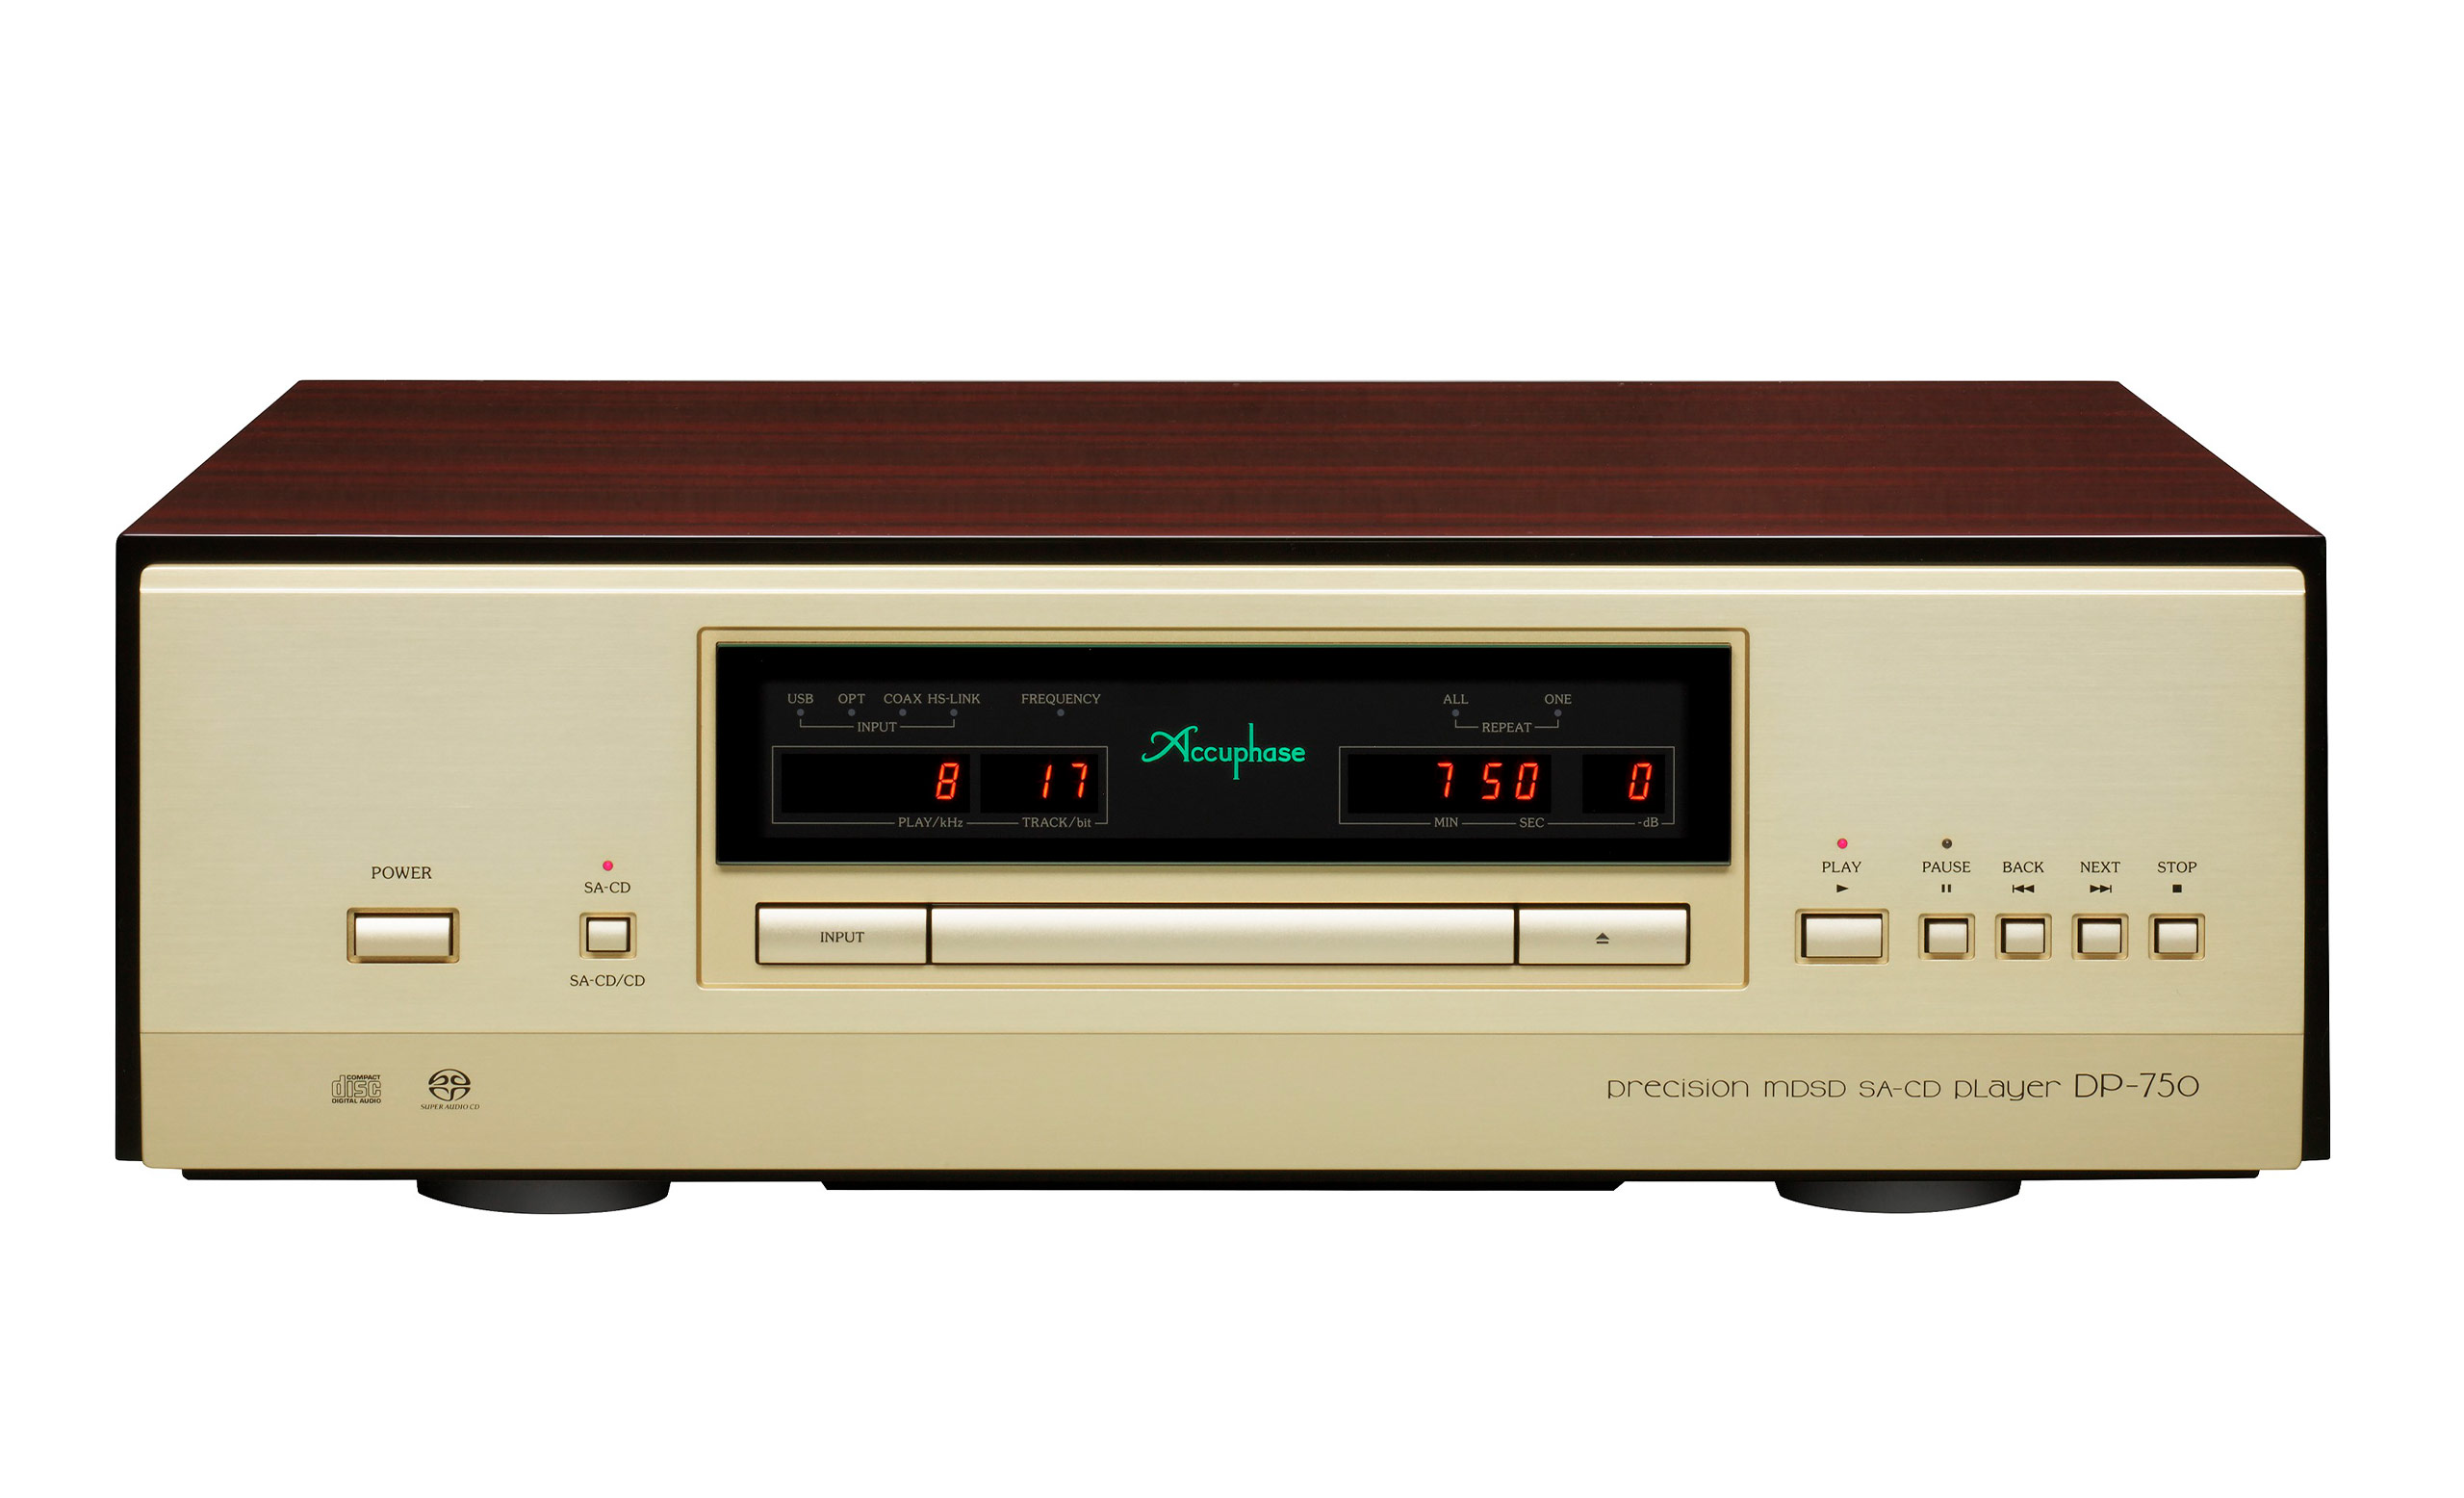 Accuphase DP-750 SACD/CD-Spieler